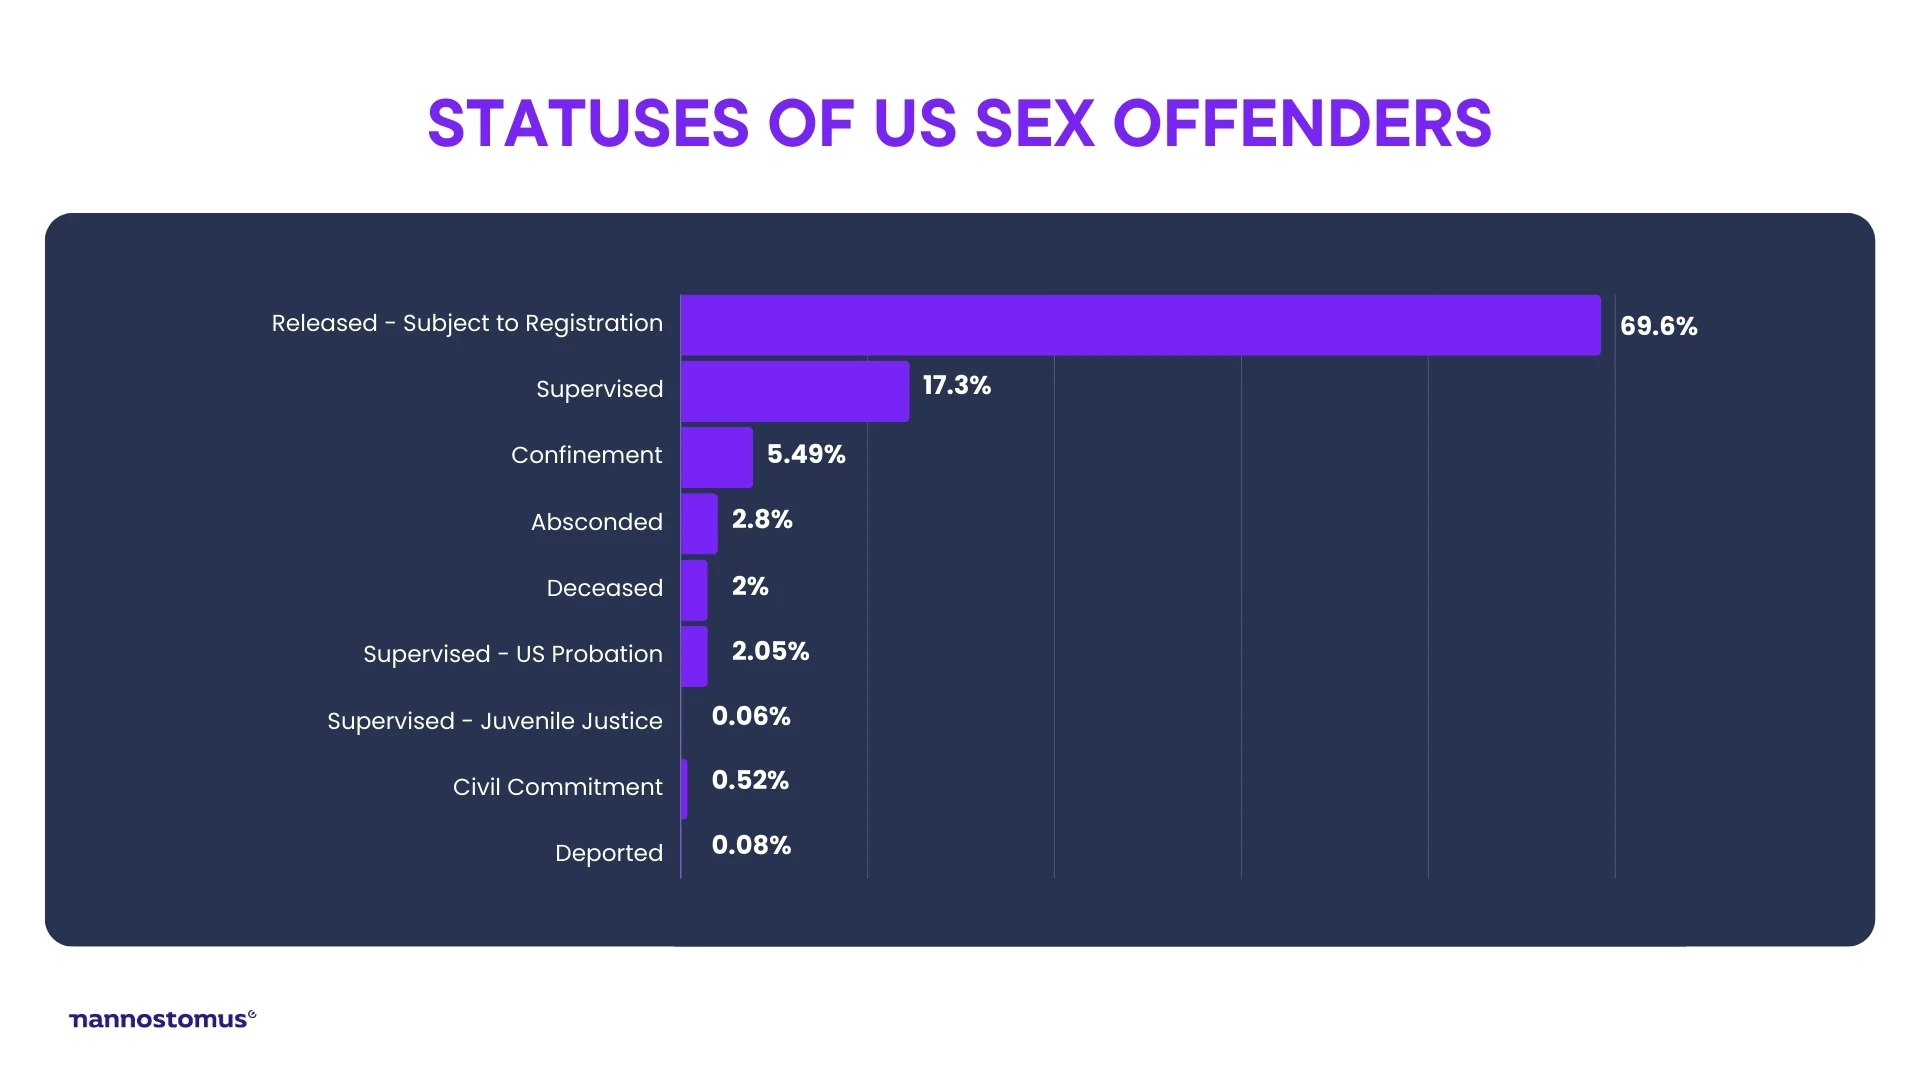 How many sex offenders are there in the US by status